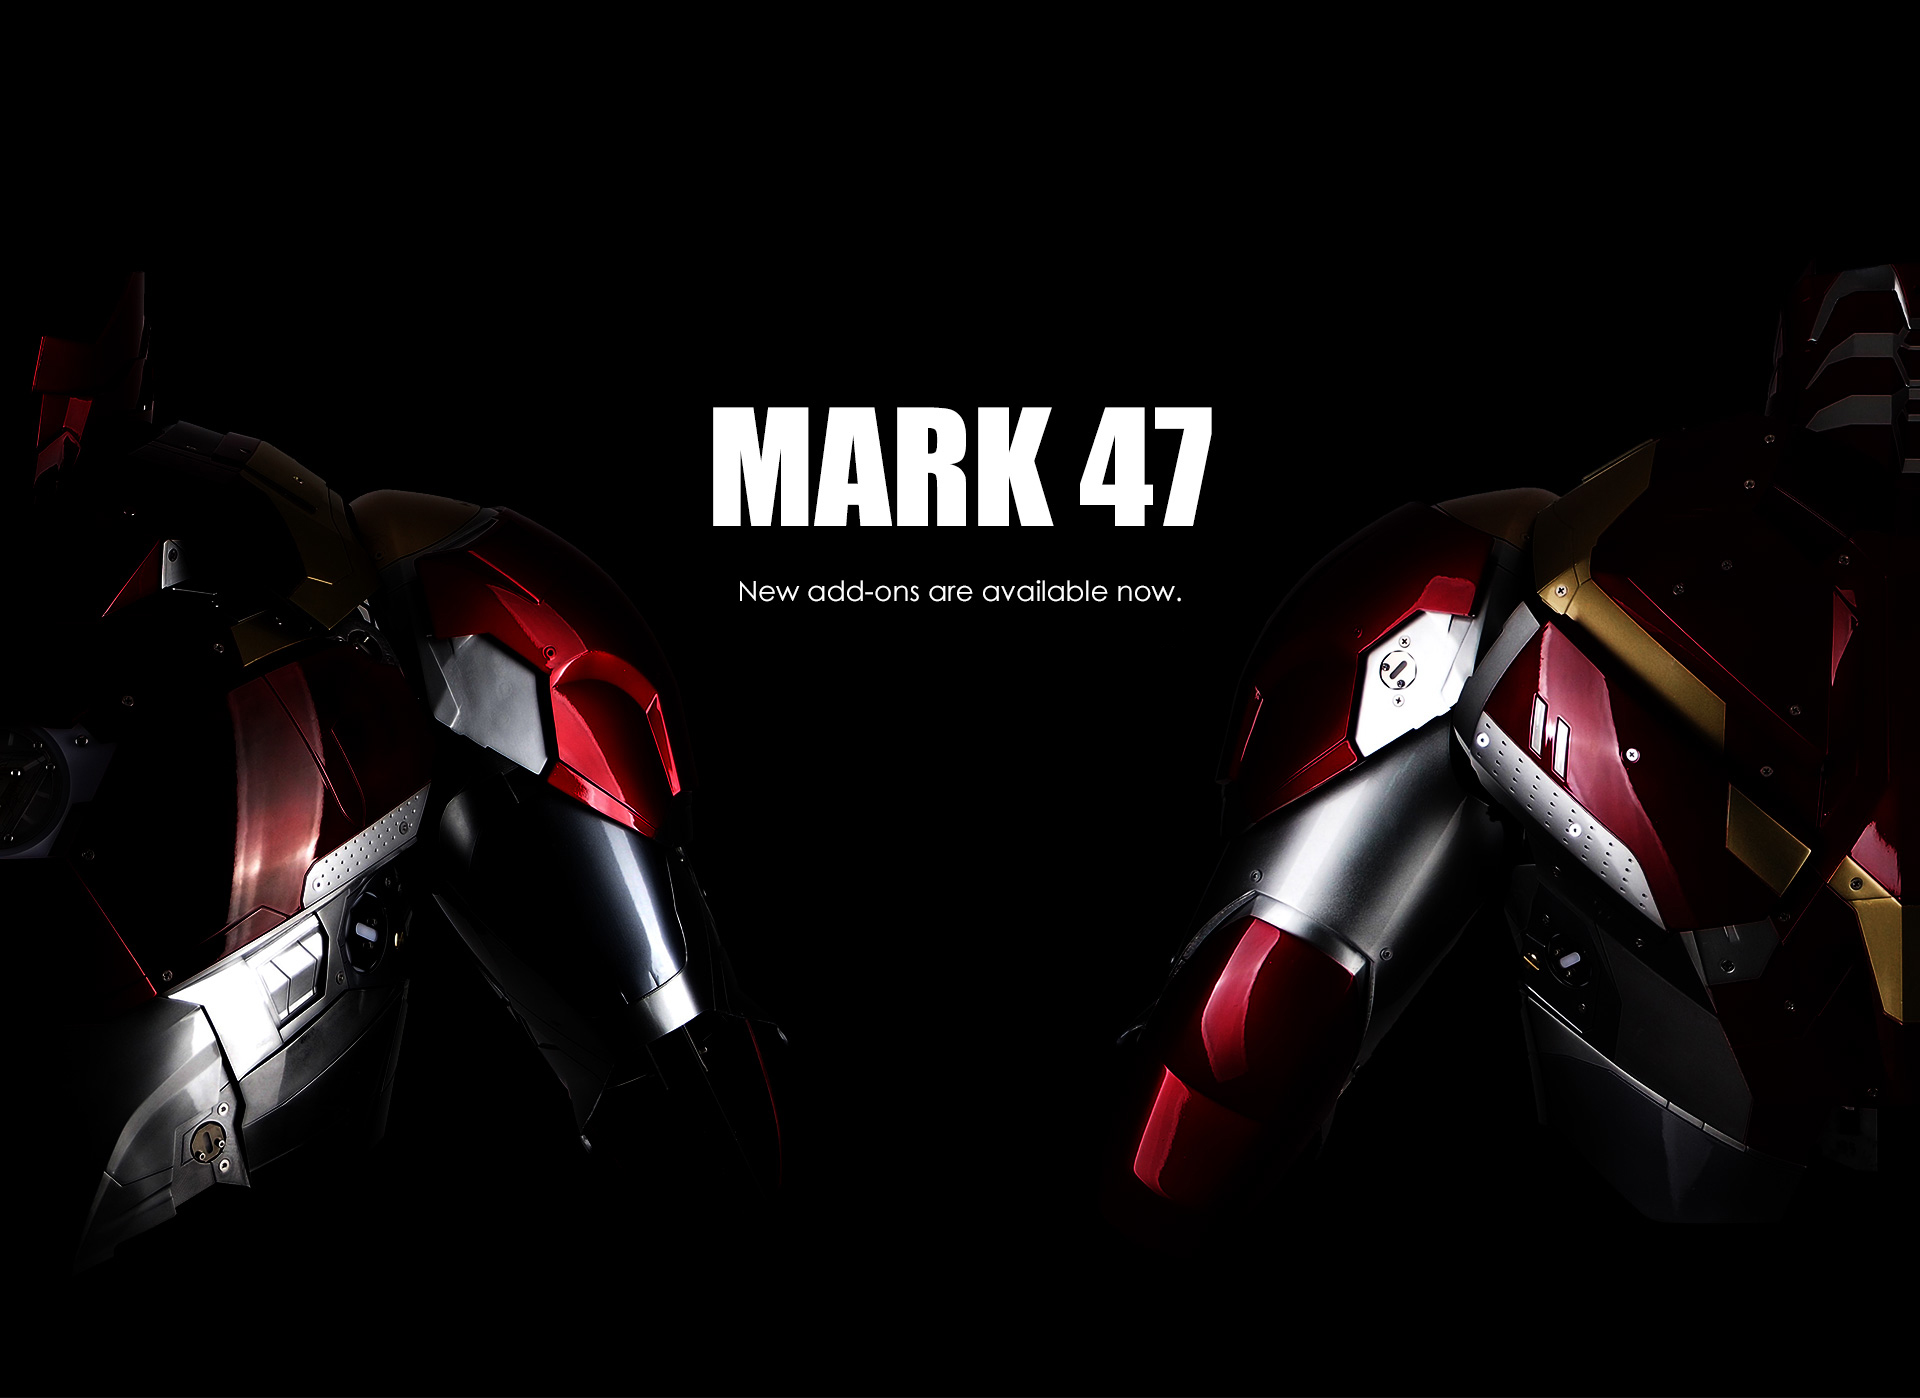 wearable Iron Man Mark 47 46 armor costume suit officially released